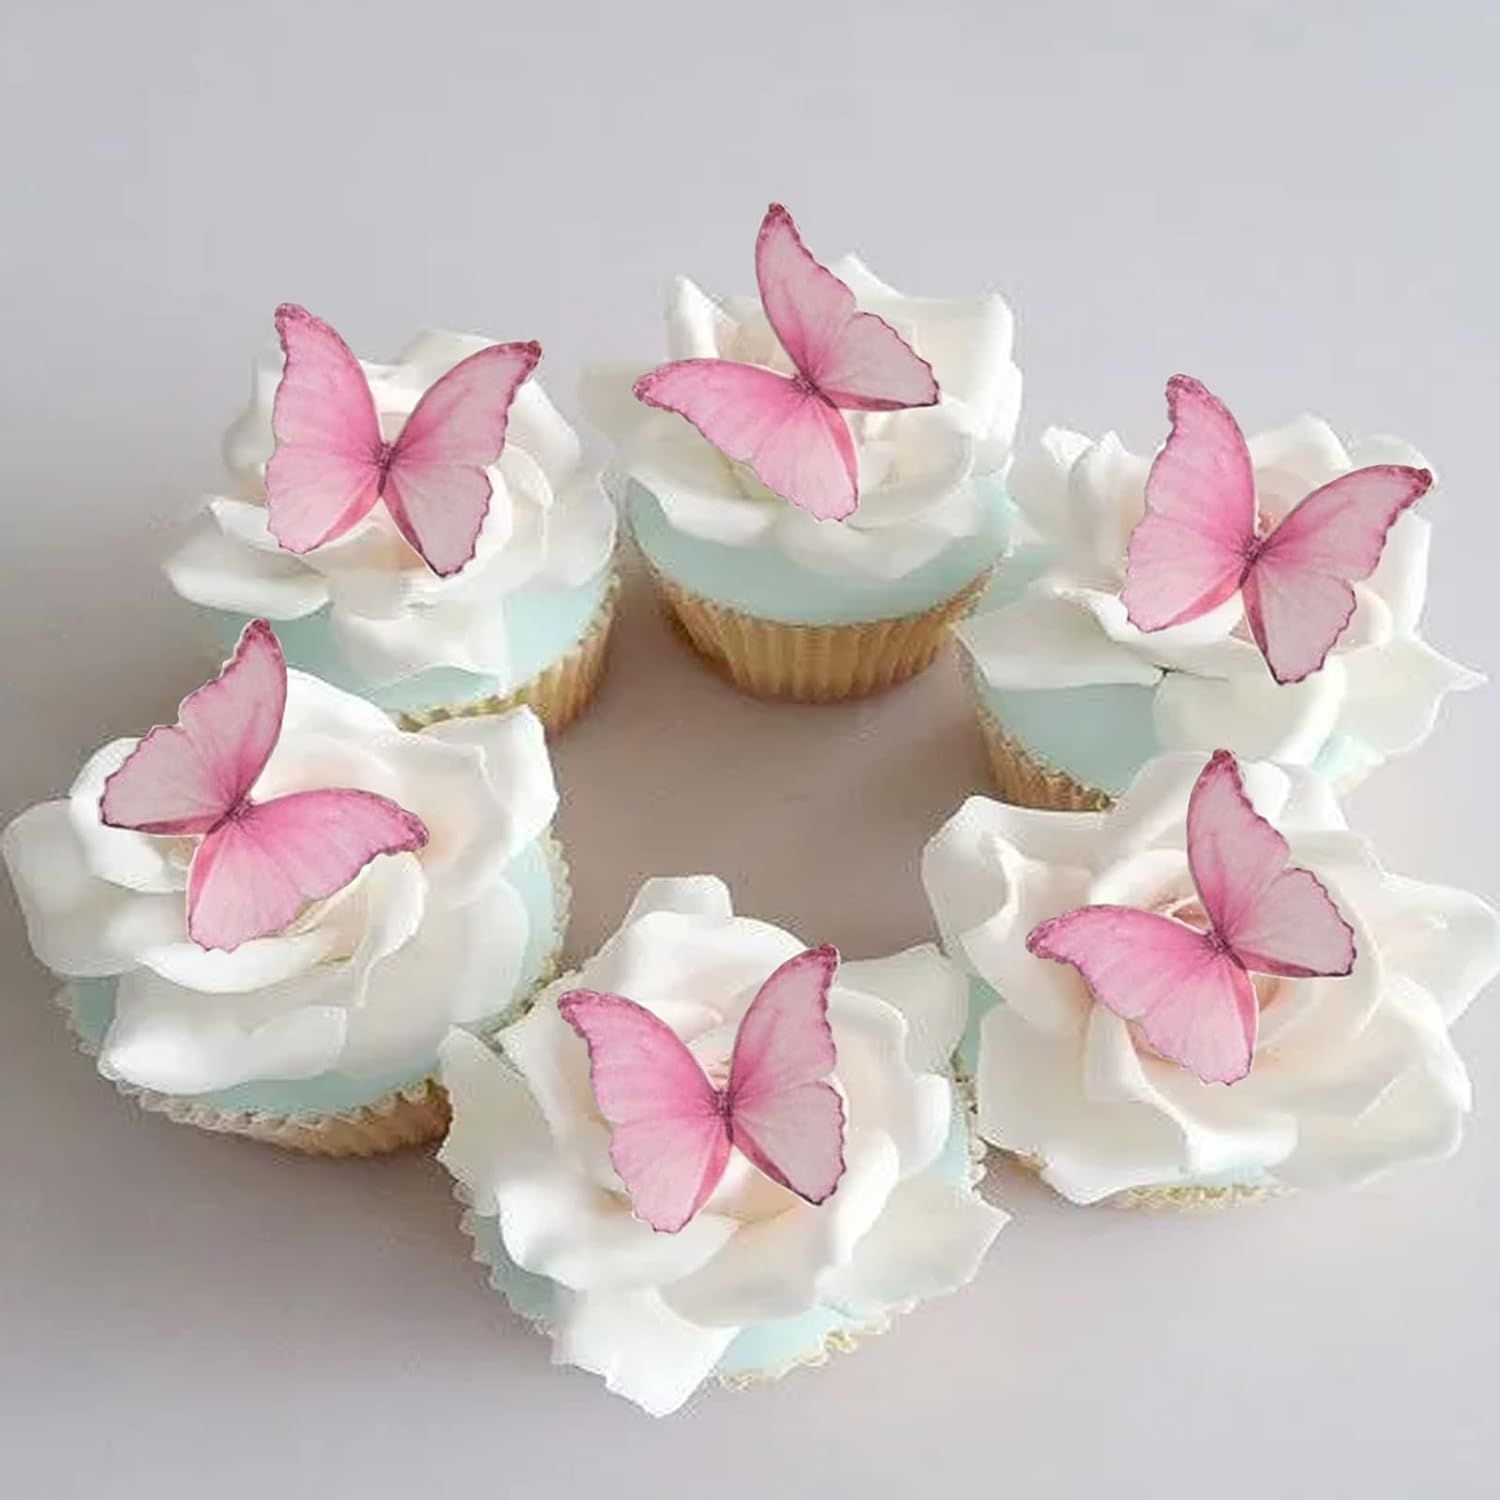 GEORLD Edible Wafer Paper Butterflies Set of 48 Pink Cake Decorations, Cupcake Topper | Amazon (US)